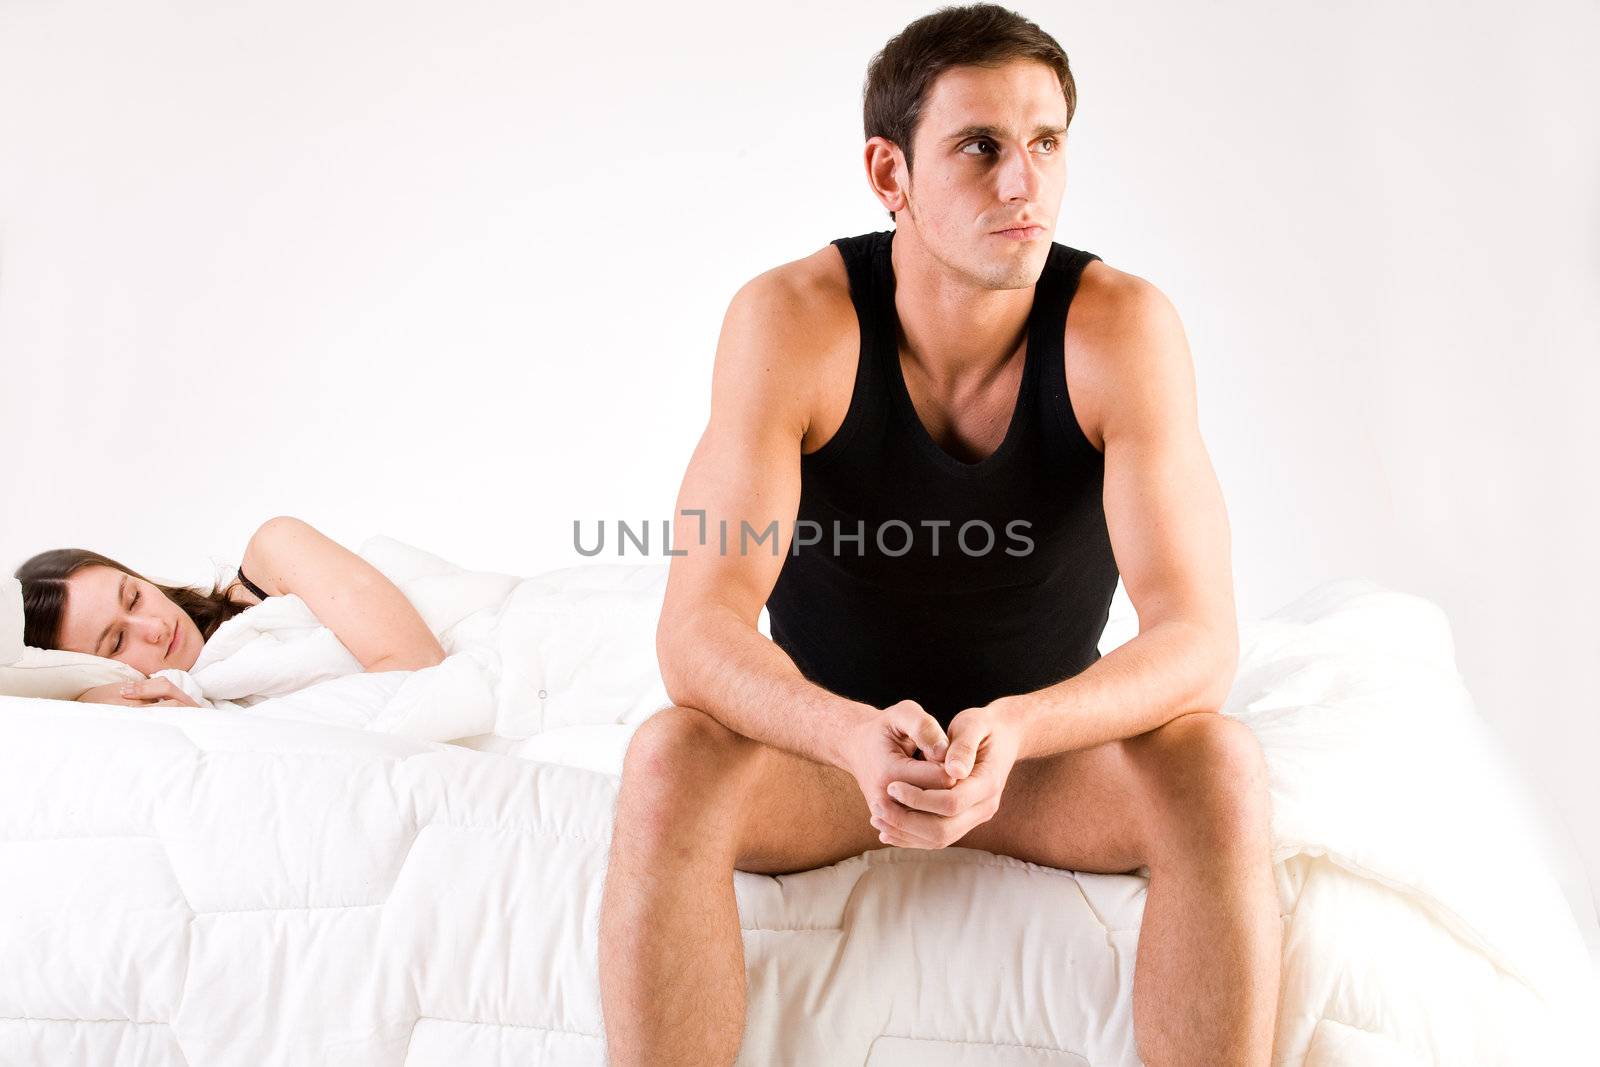 Young adult couple in the studio on a bed